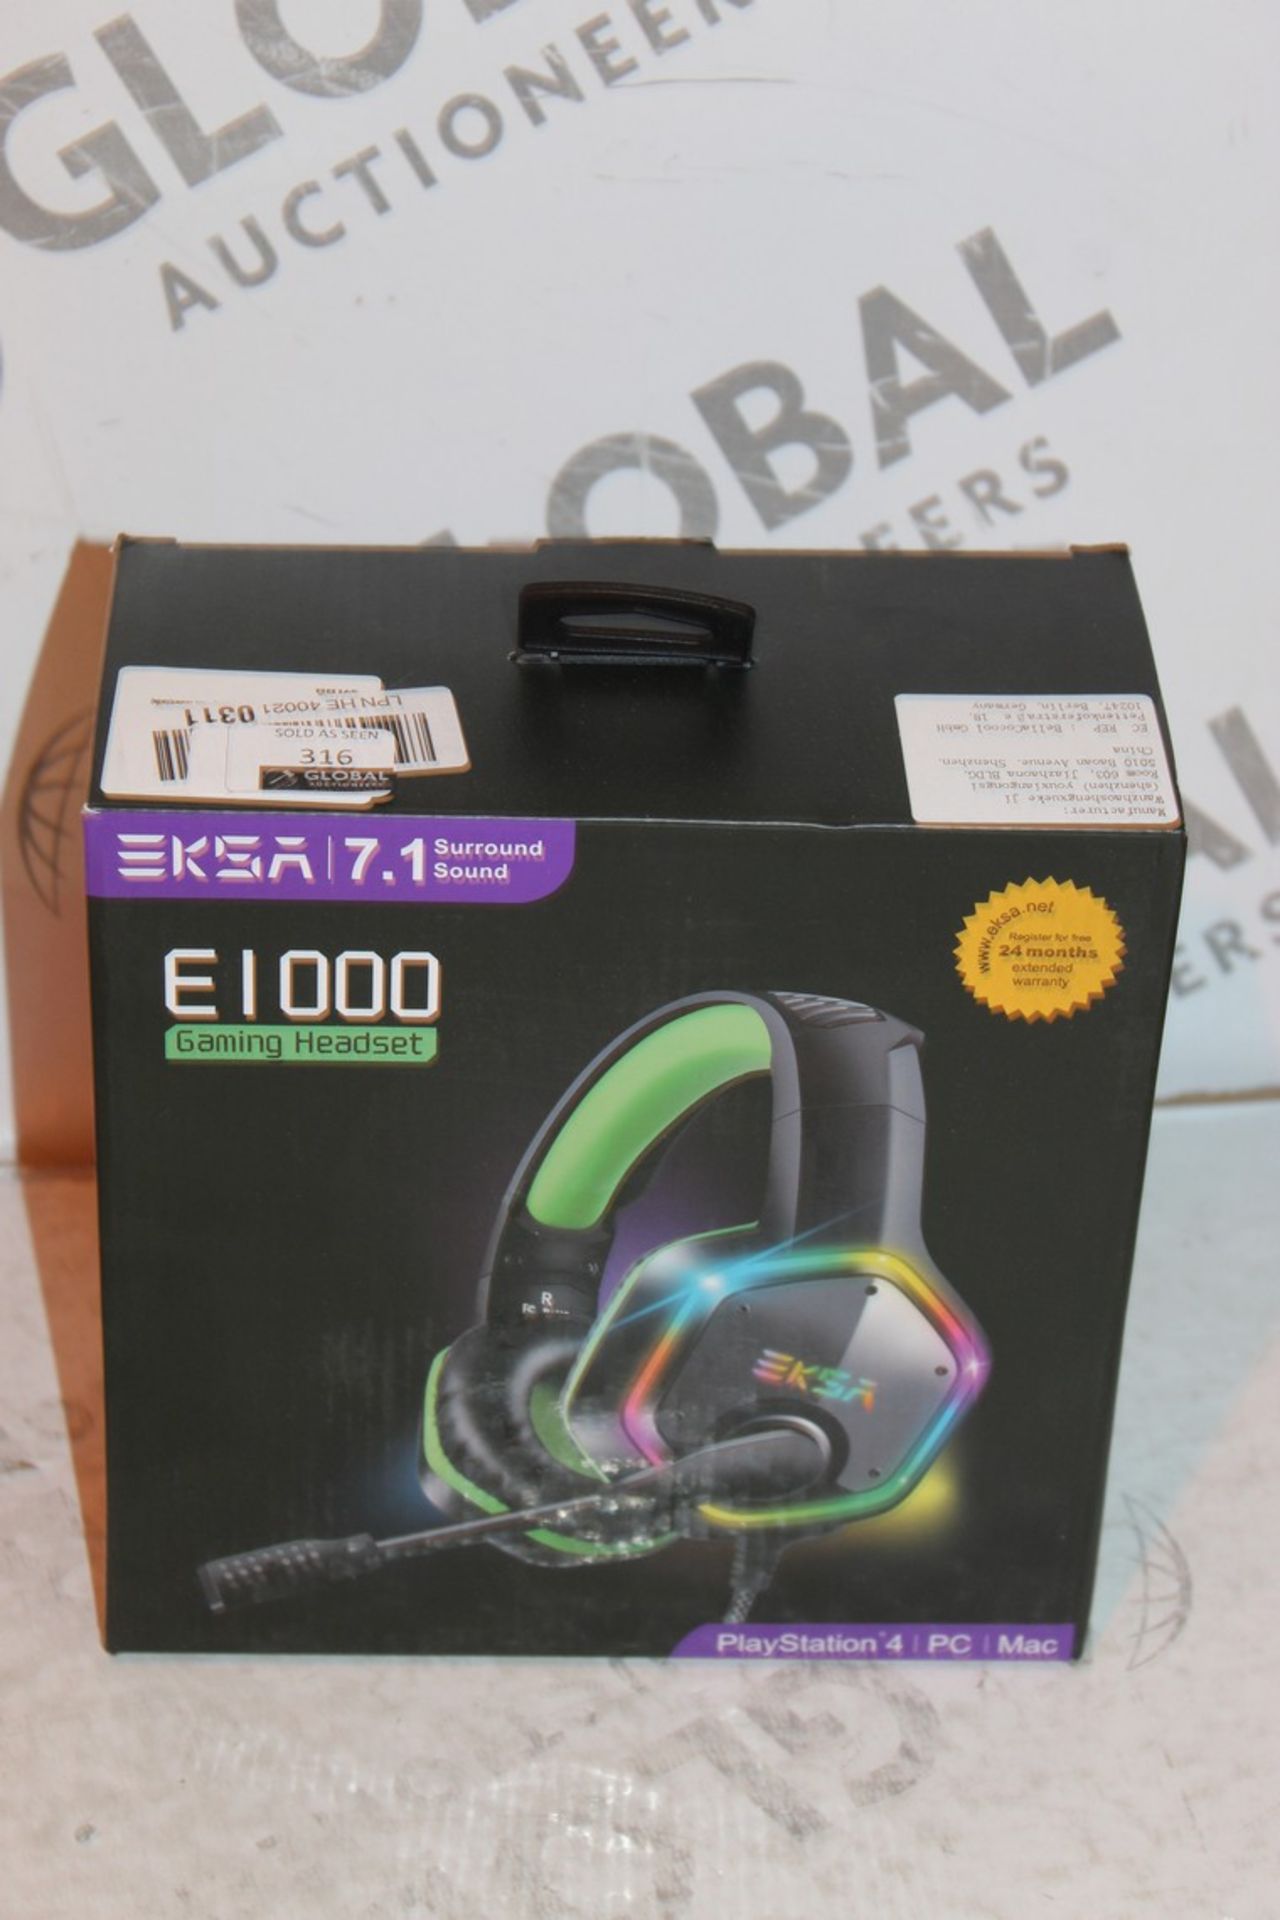 Boxed Pair EKSA Black & Green 7.1 Channel Surround Sound Headphones RRP £50 (Pictures Are For